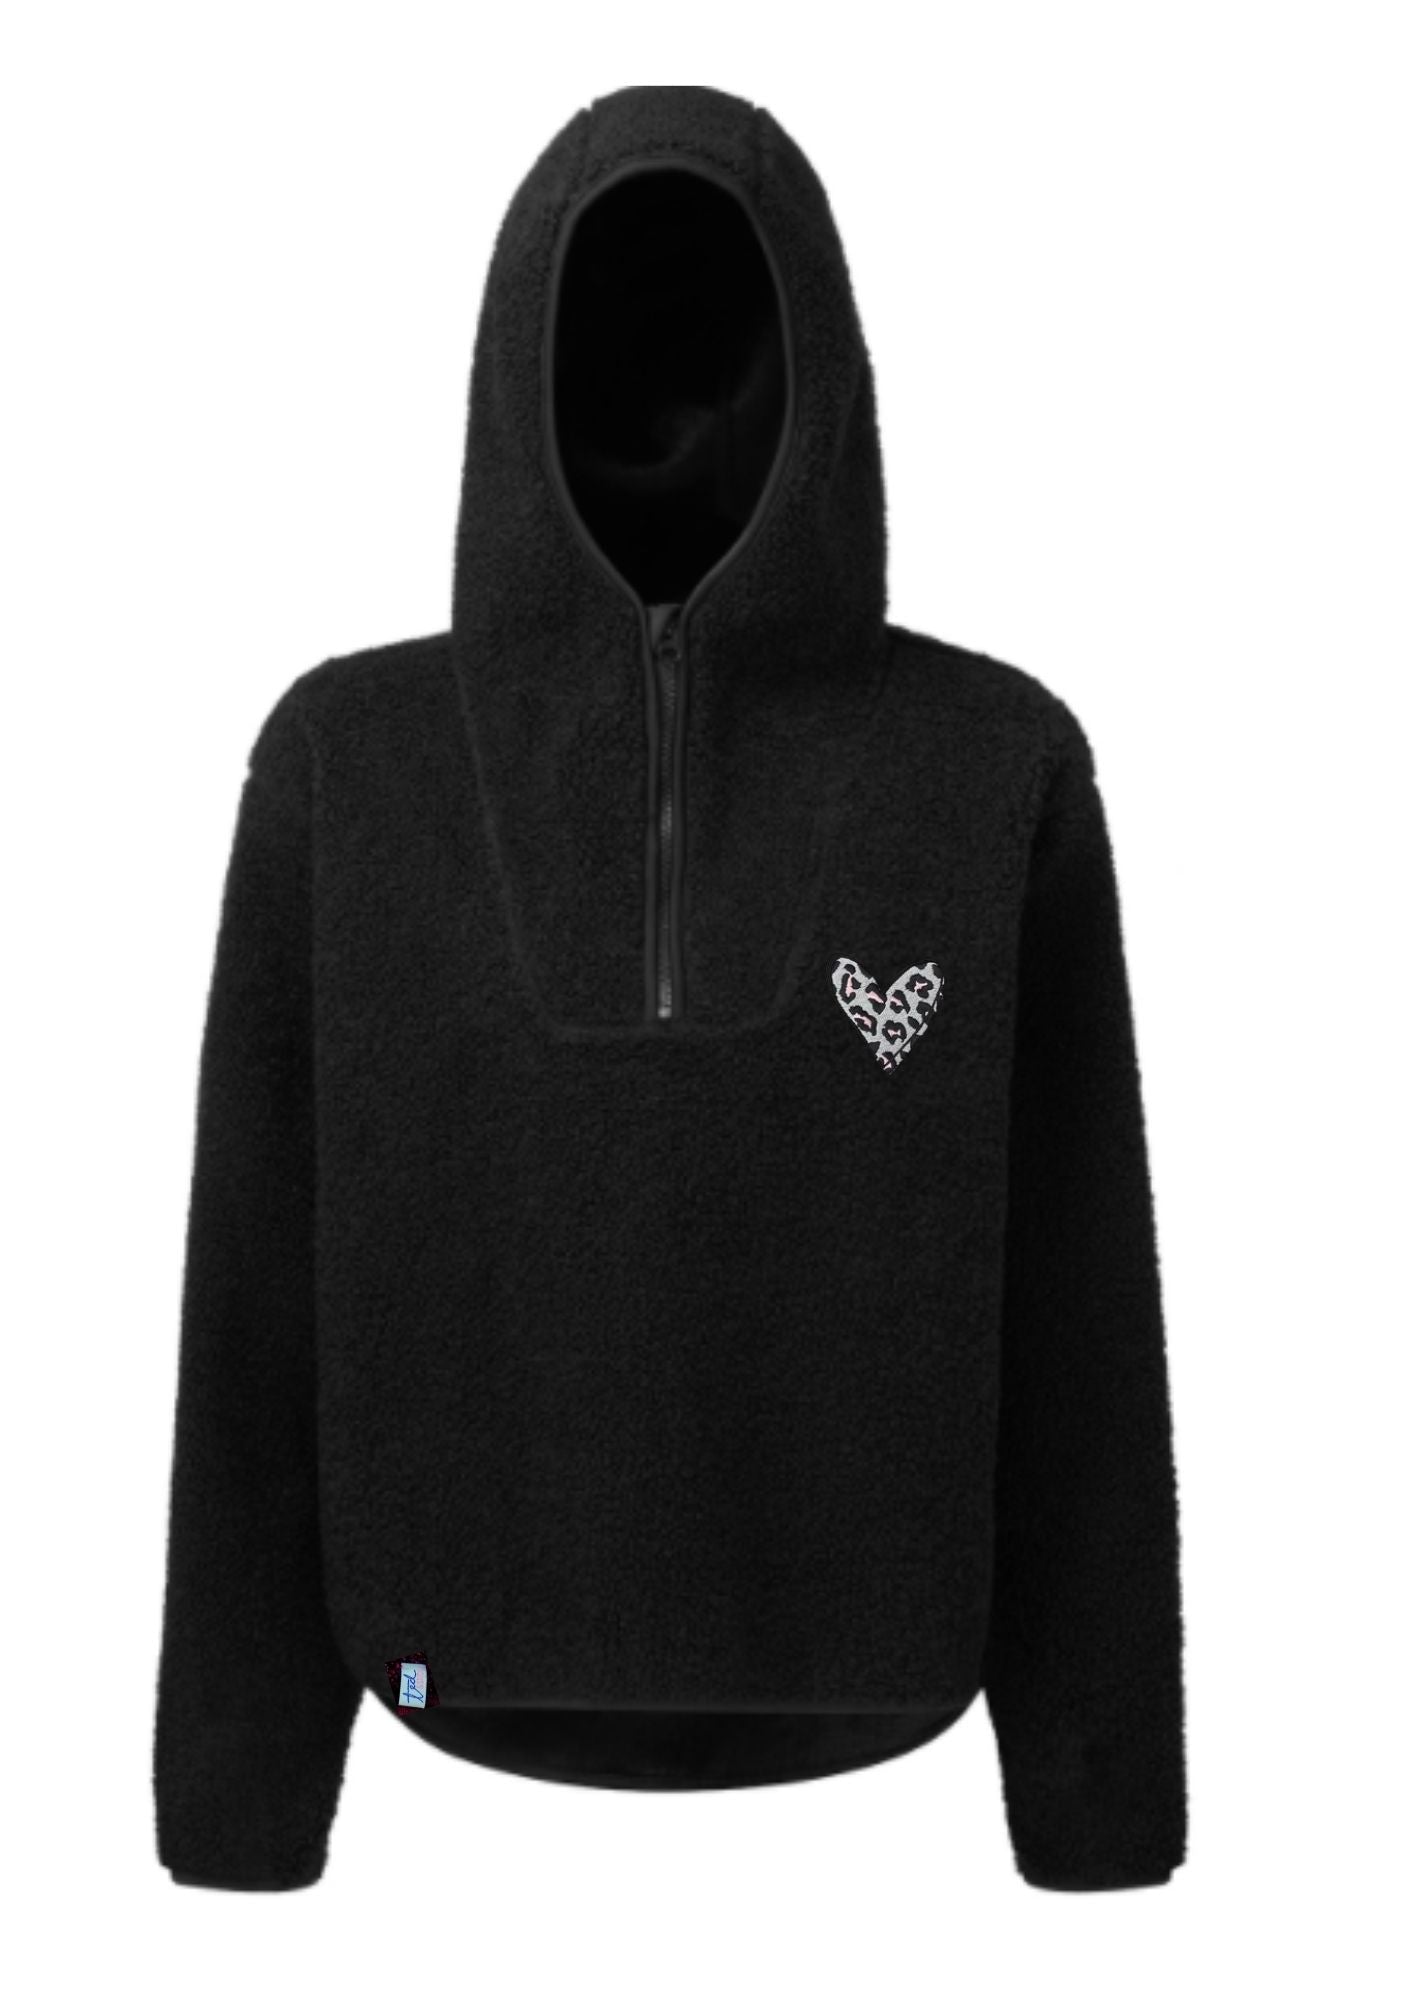 SAMPLE SALE Sherpa 1/4 Zip Fleece with Hood and Leopard Print Heart 3 colours Sizes 2XS, L-XL